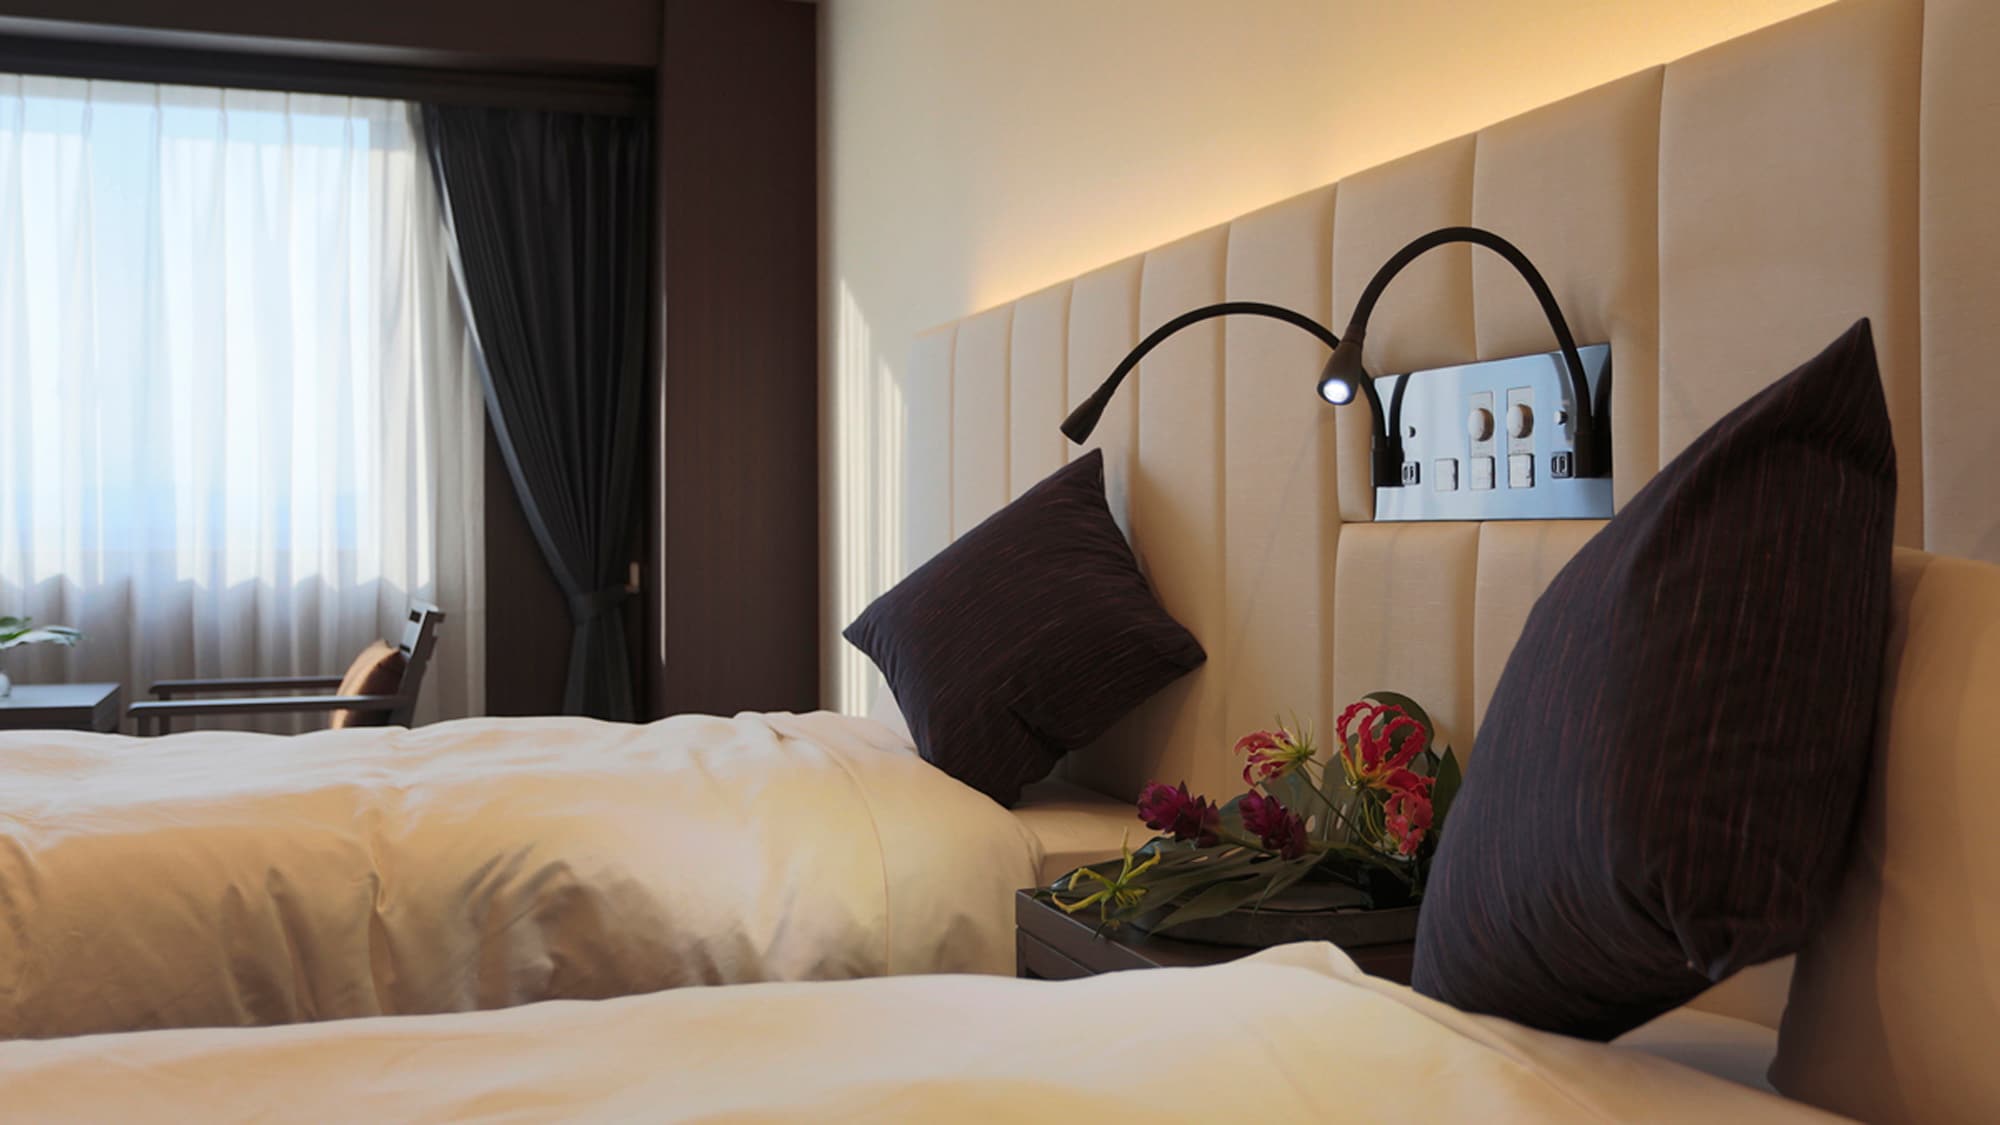 [11F Grande Room] 4 beds can be lined up side by side by using 2 stacking beds. Co-sleeping peace of mind (for 4 people)